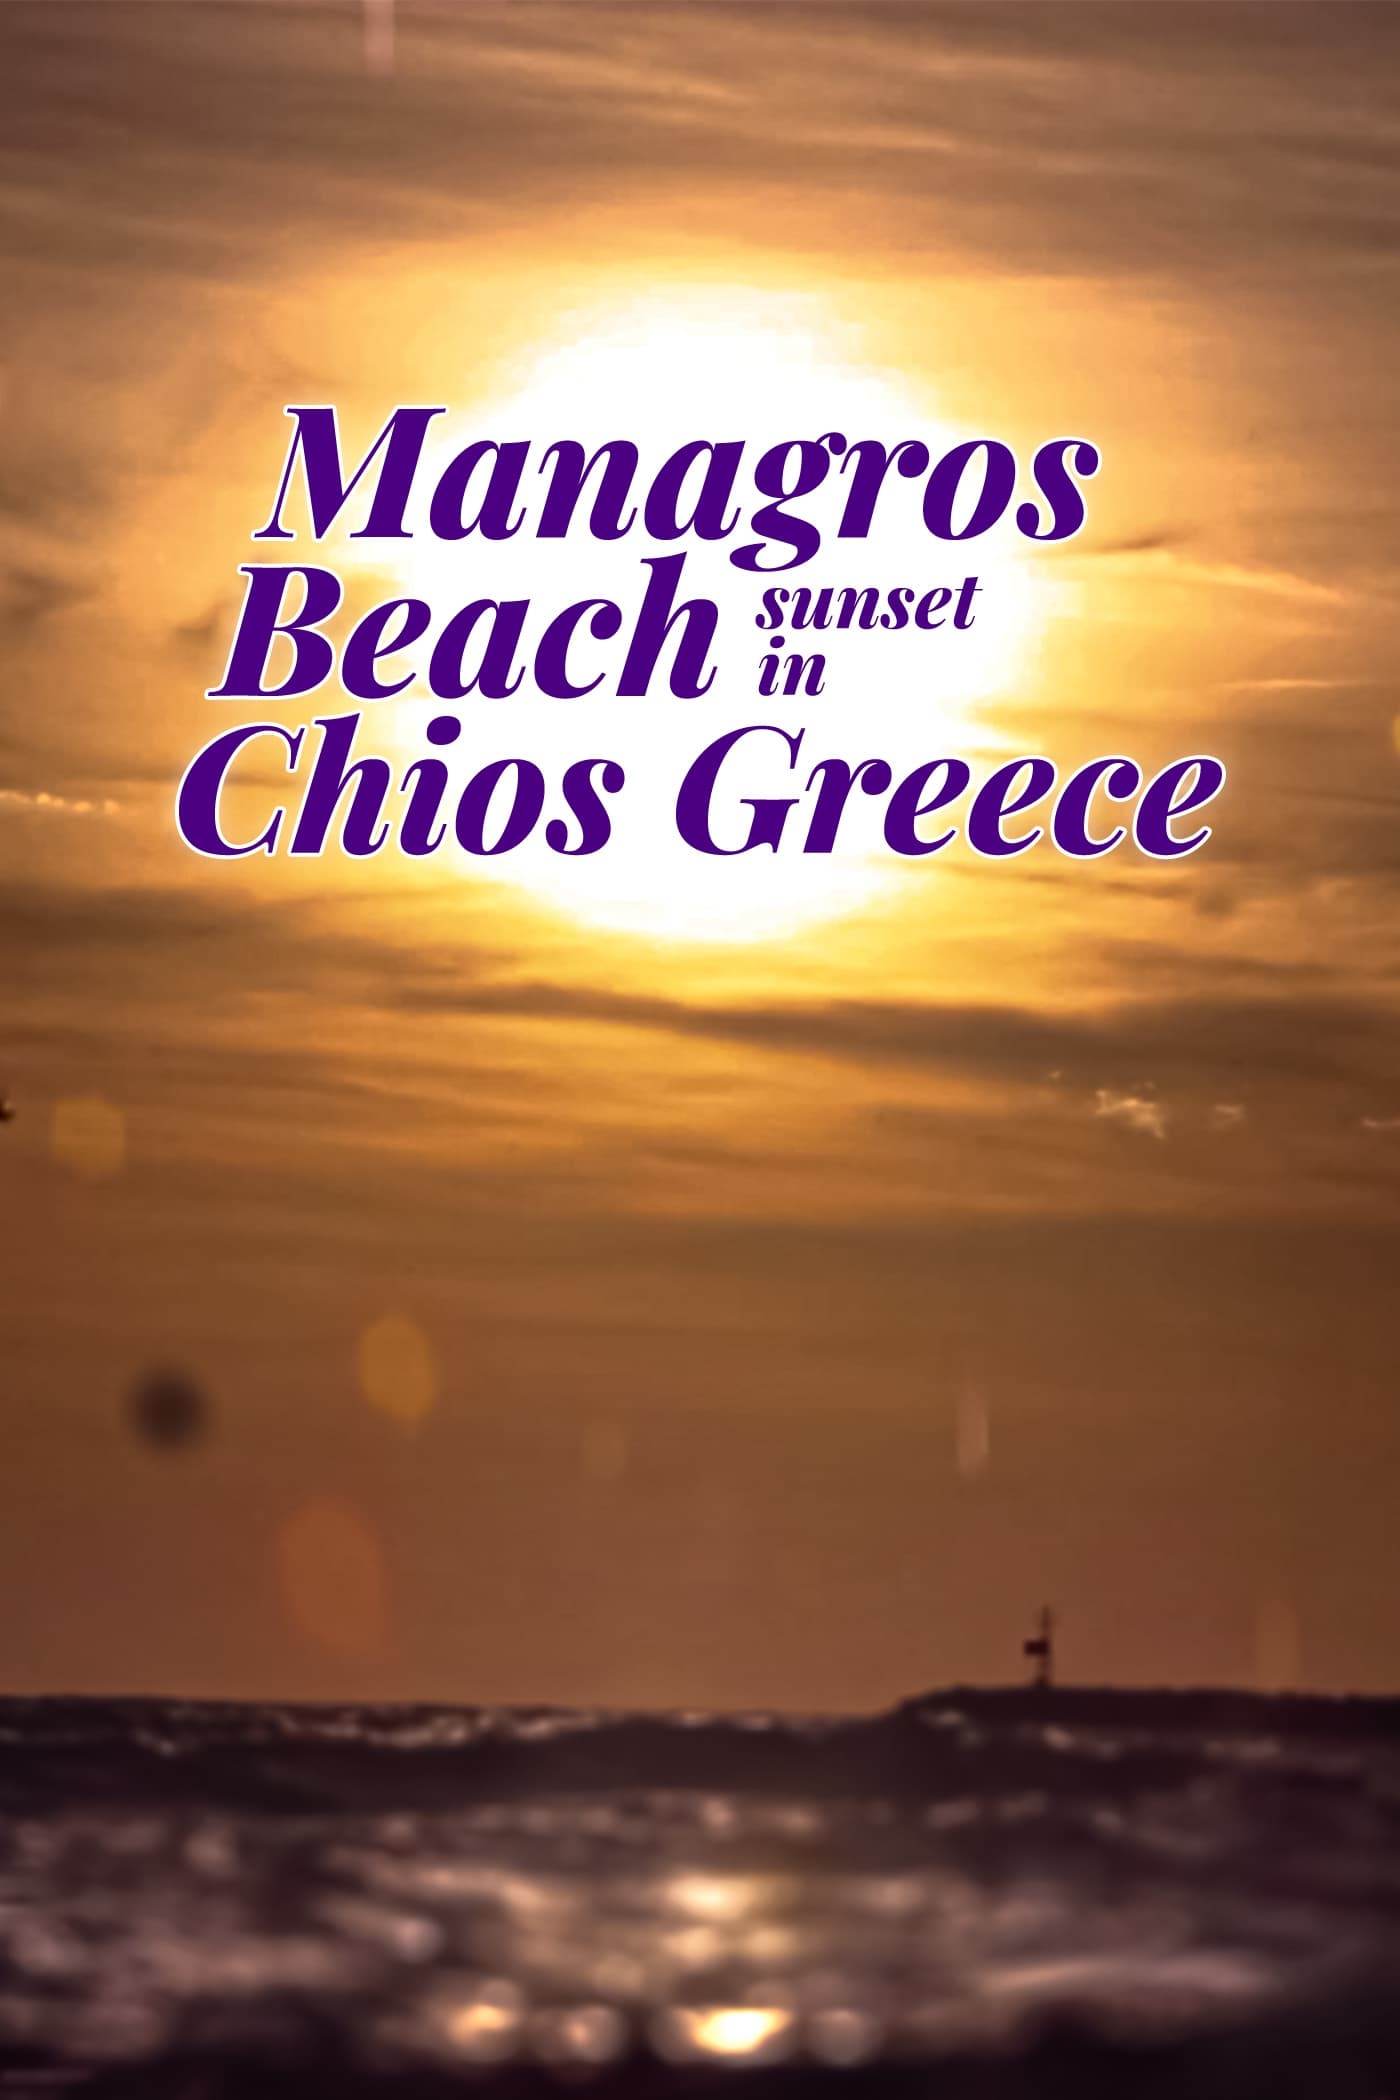 Managros Beach Sunset in Chios Greece